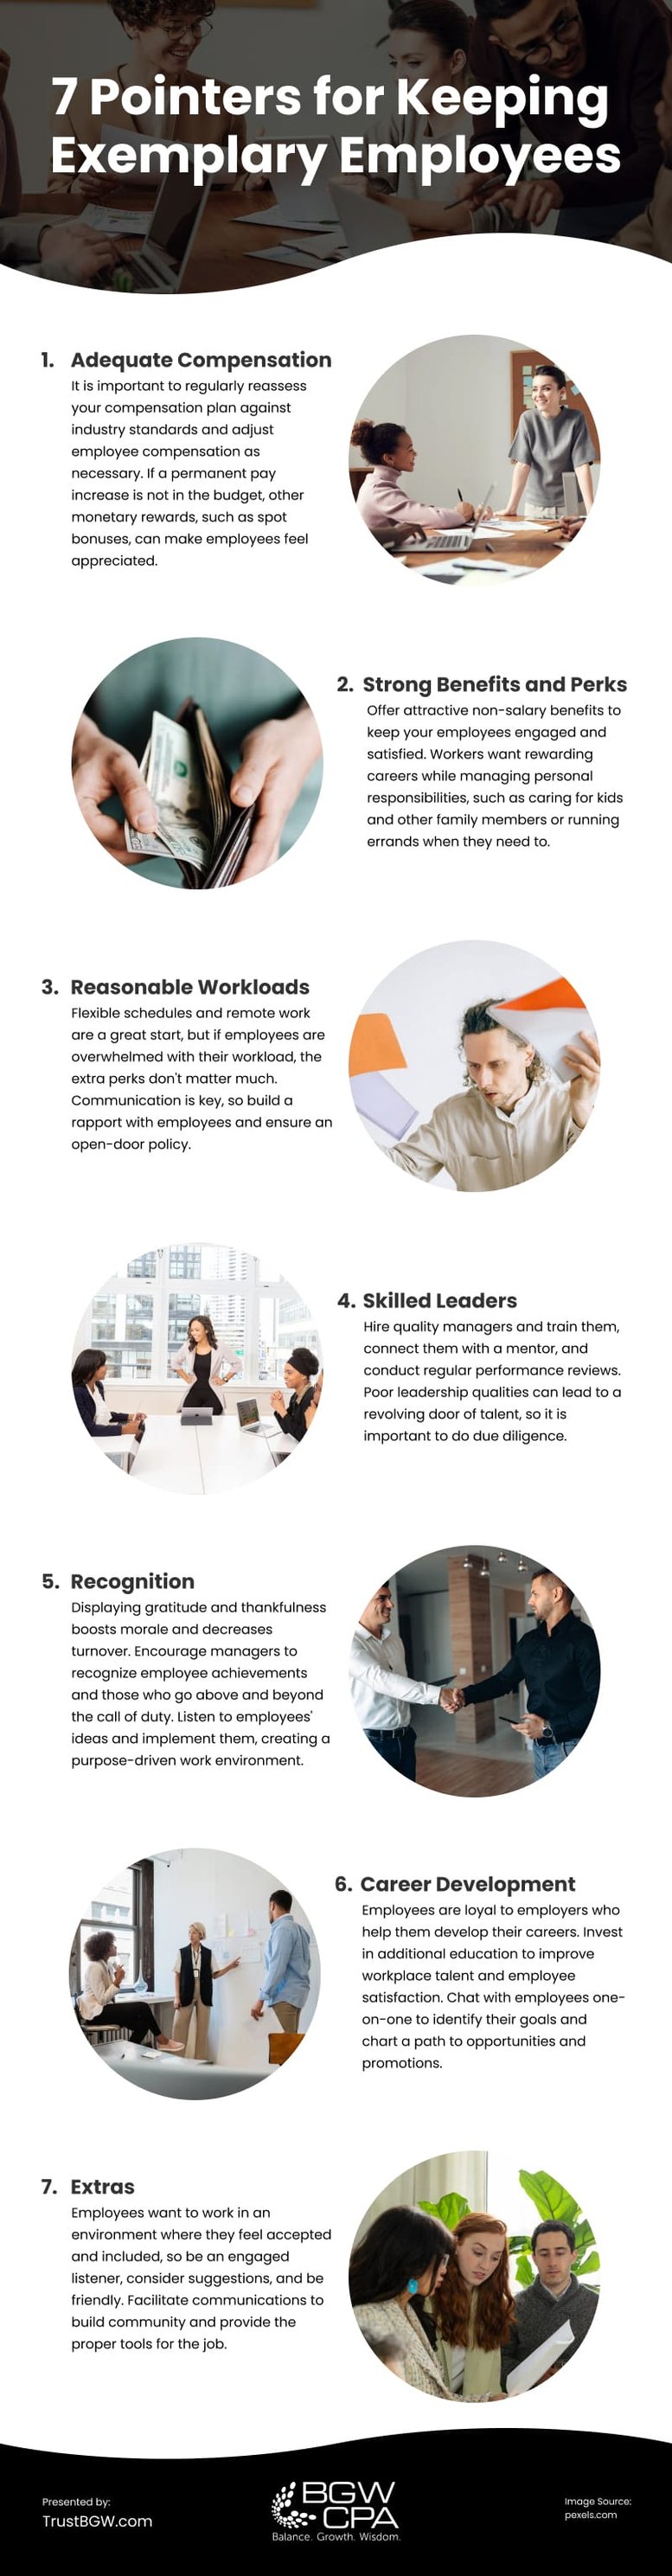 7 Pointers for Keeping Exemplary Employees Infographic